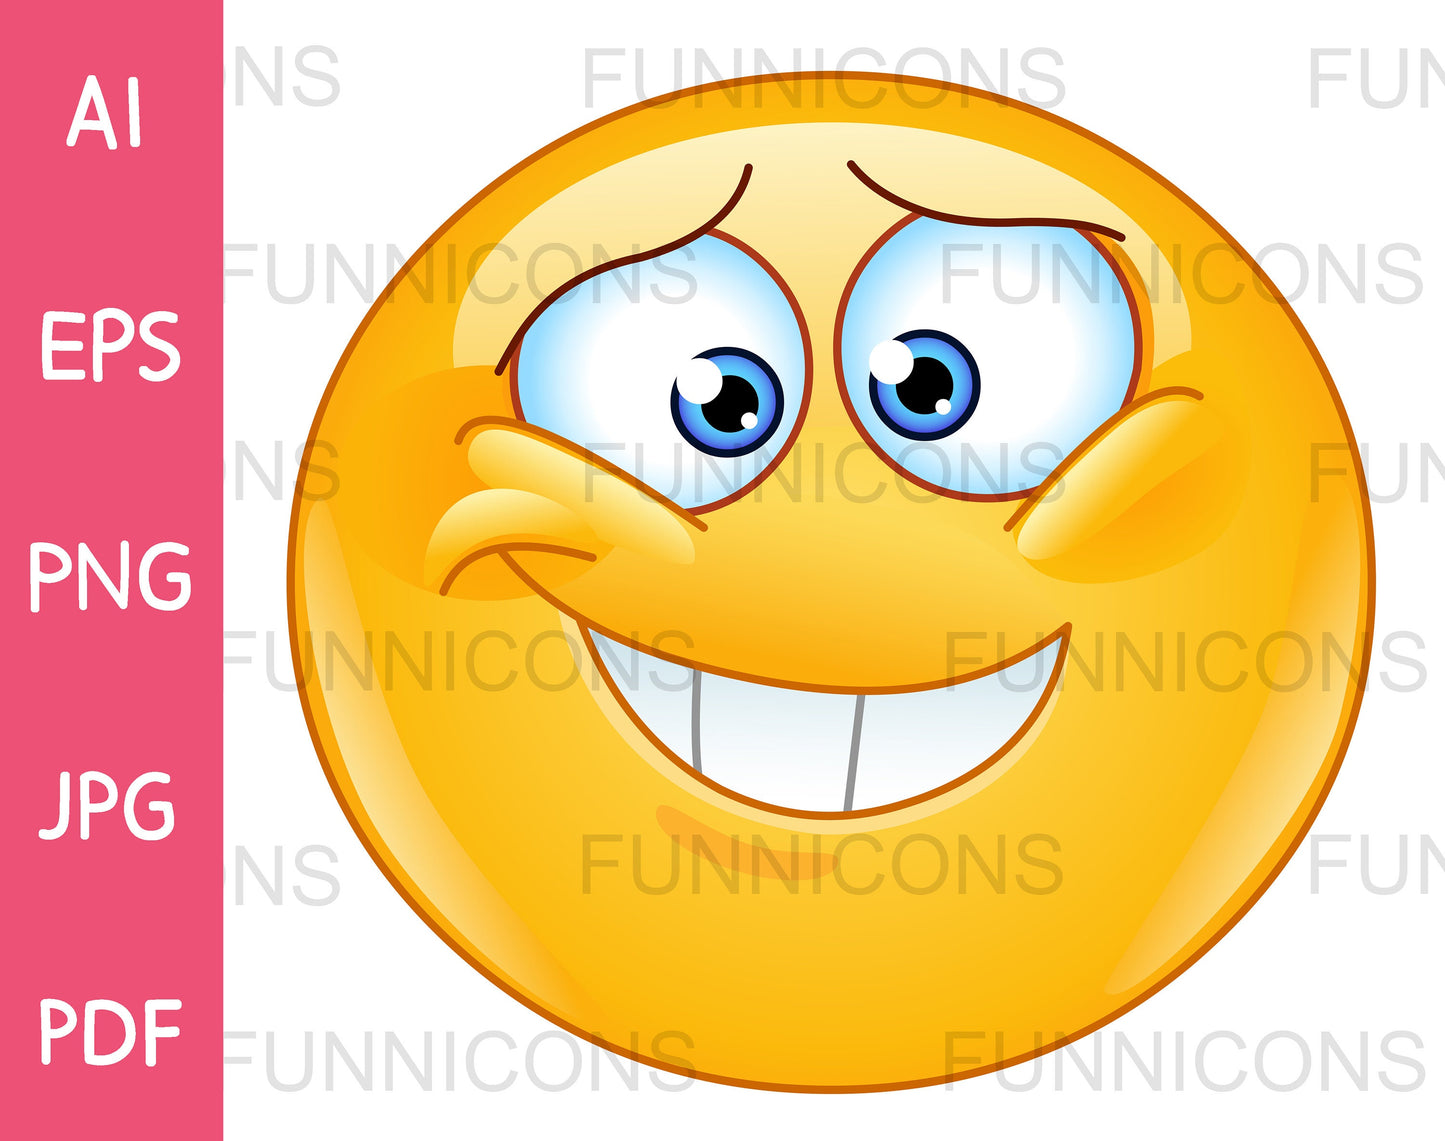 Embarrassed Emoji Showing an Insecure Smile